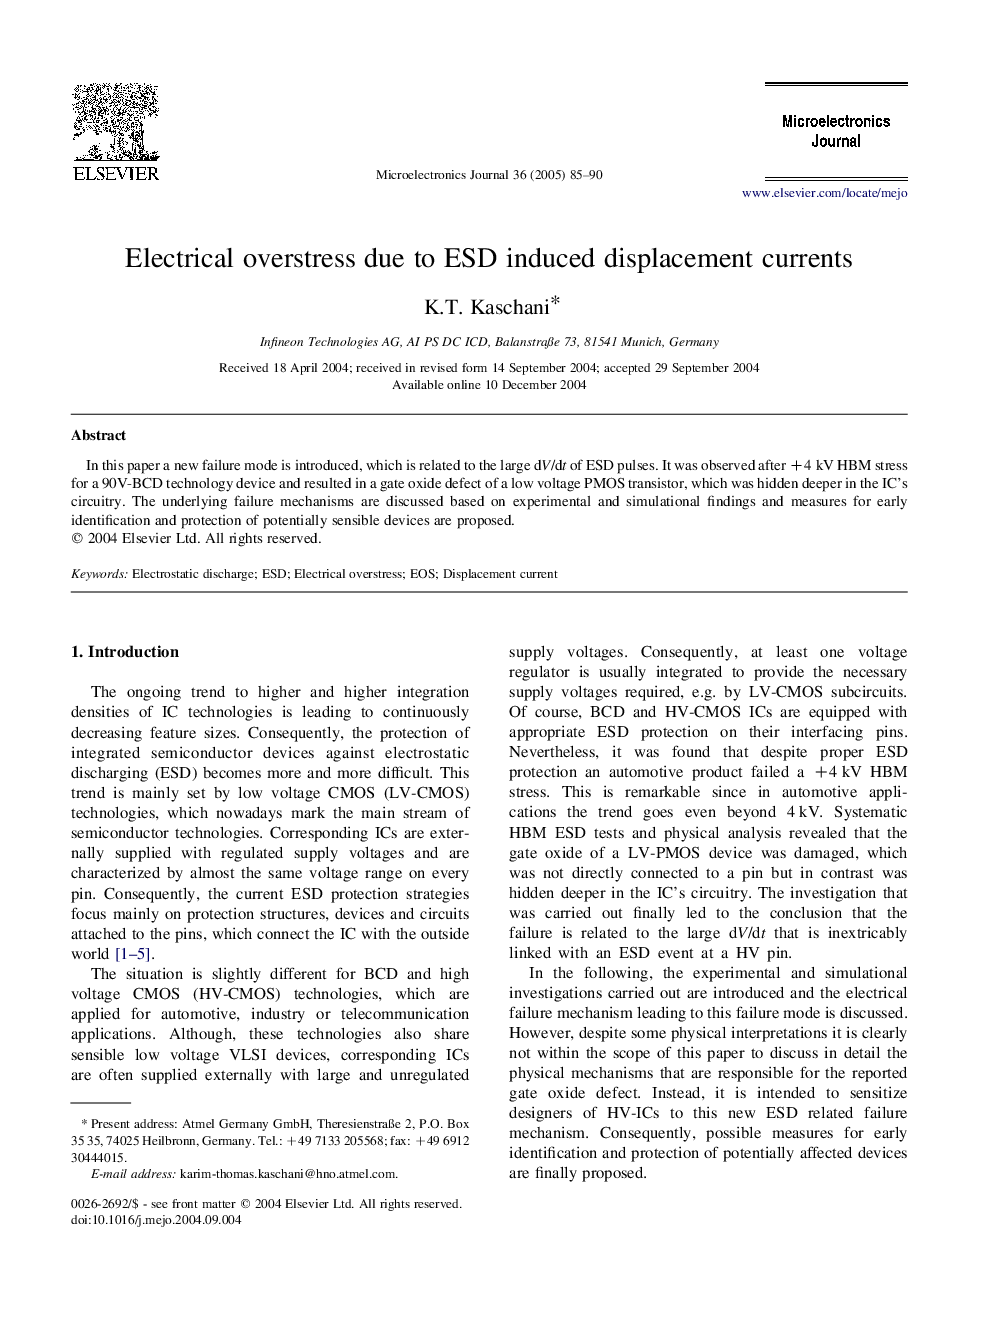 Electrical overstress due to ESD induced displacement currents